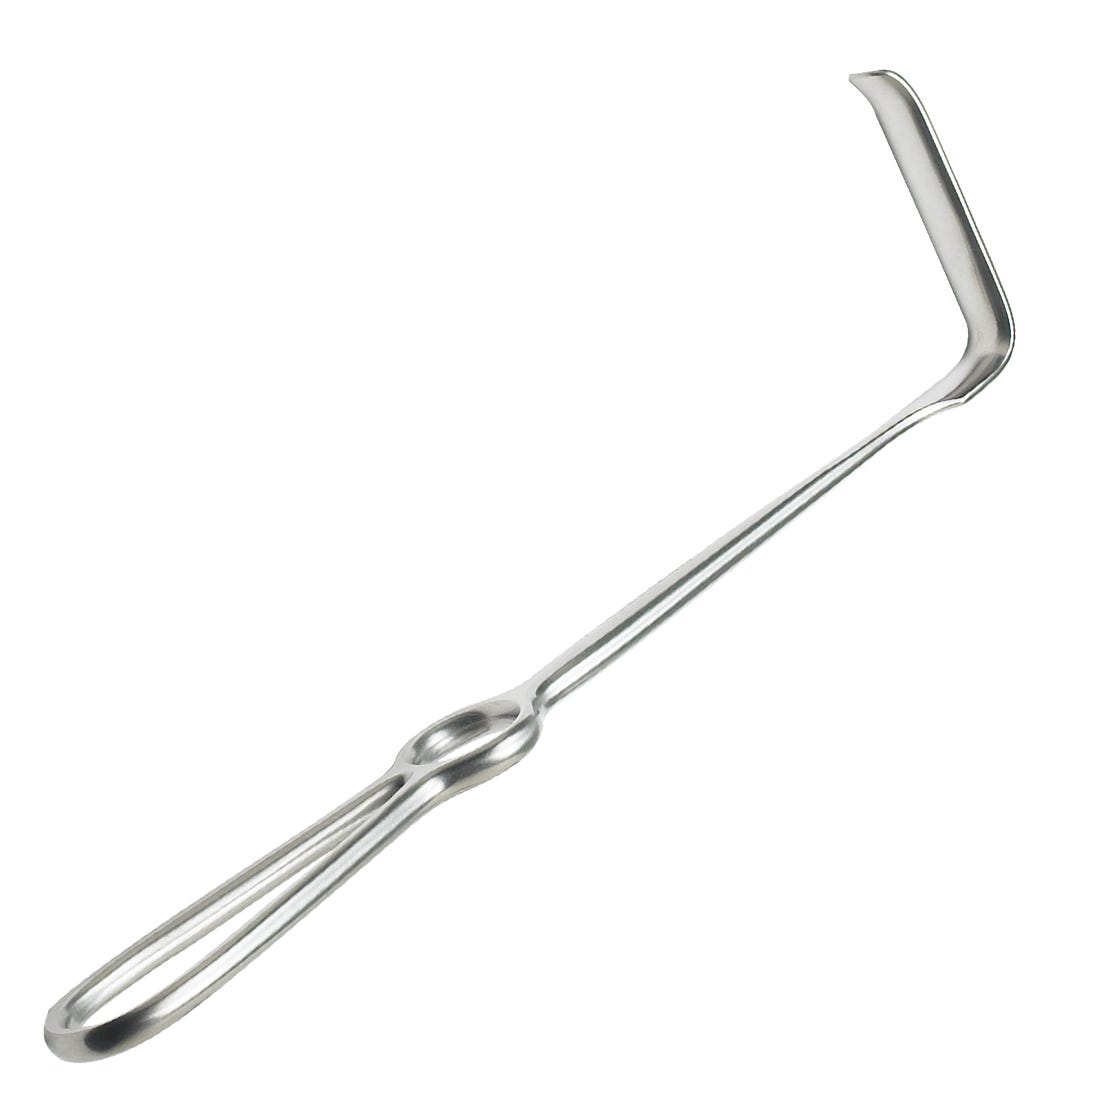 Obwegeser Type Surgical Retractor Concave, Curved Down, 12mm x 55mm